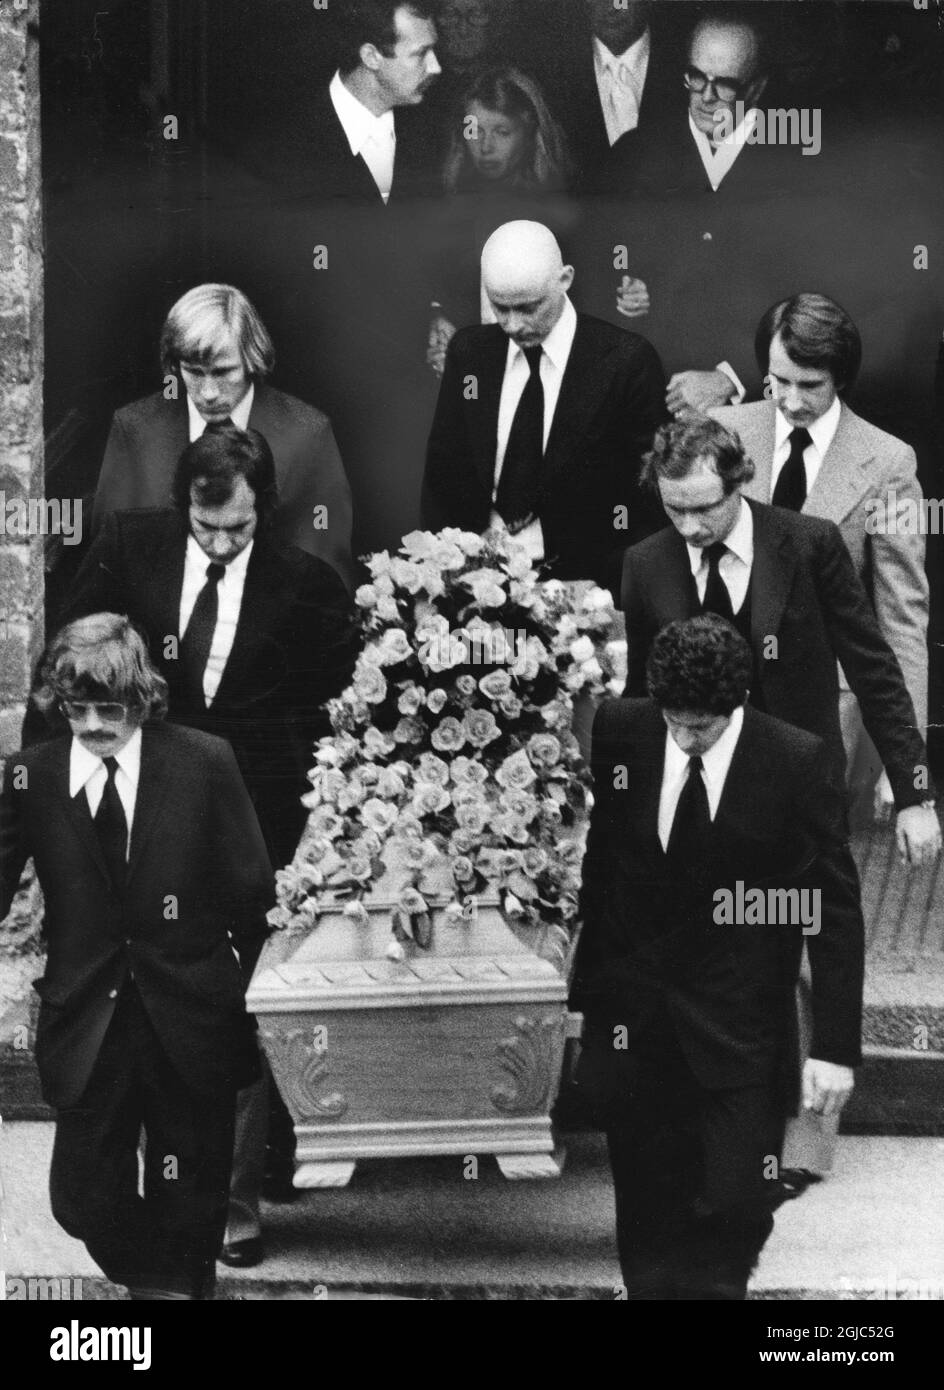 Emerson Fittipalti, James Hunt, Jody Scheckter, Niki Lauda,AND Tim Schenken, Gunnar Nilsson and Mrs Barbro Peterson during the funeral of r formula-one drover Ronnie Peterson 1978-10-19 Photo Stig-Goan Nilsson / Aftonbladet / TT code 2512  Stock Photo